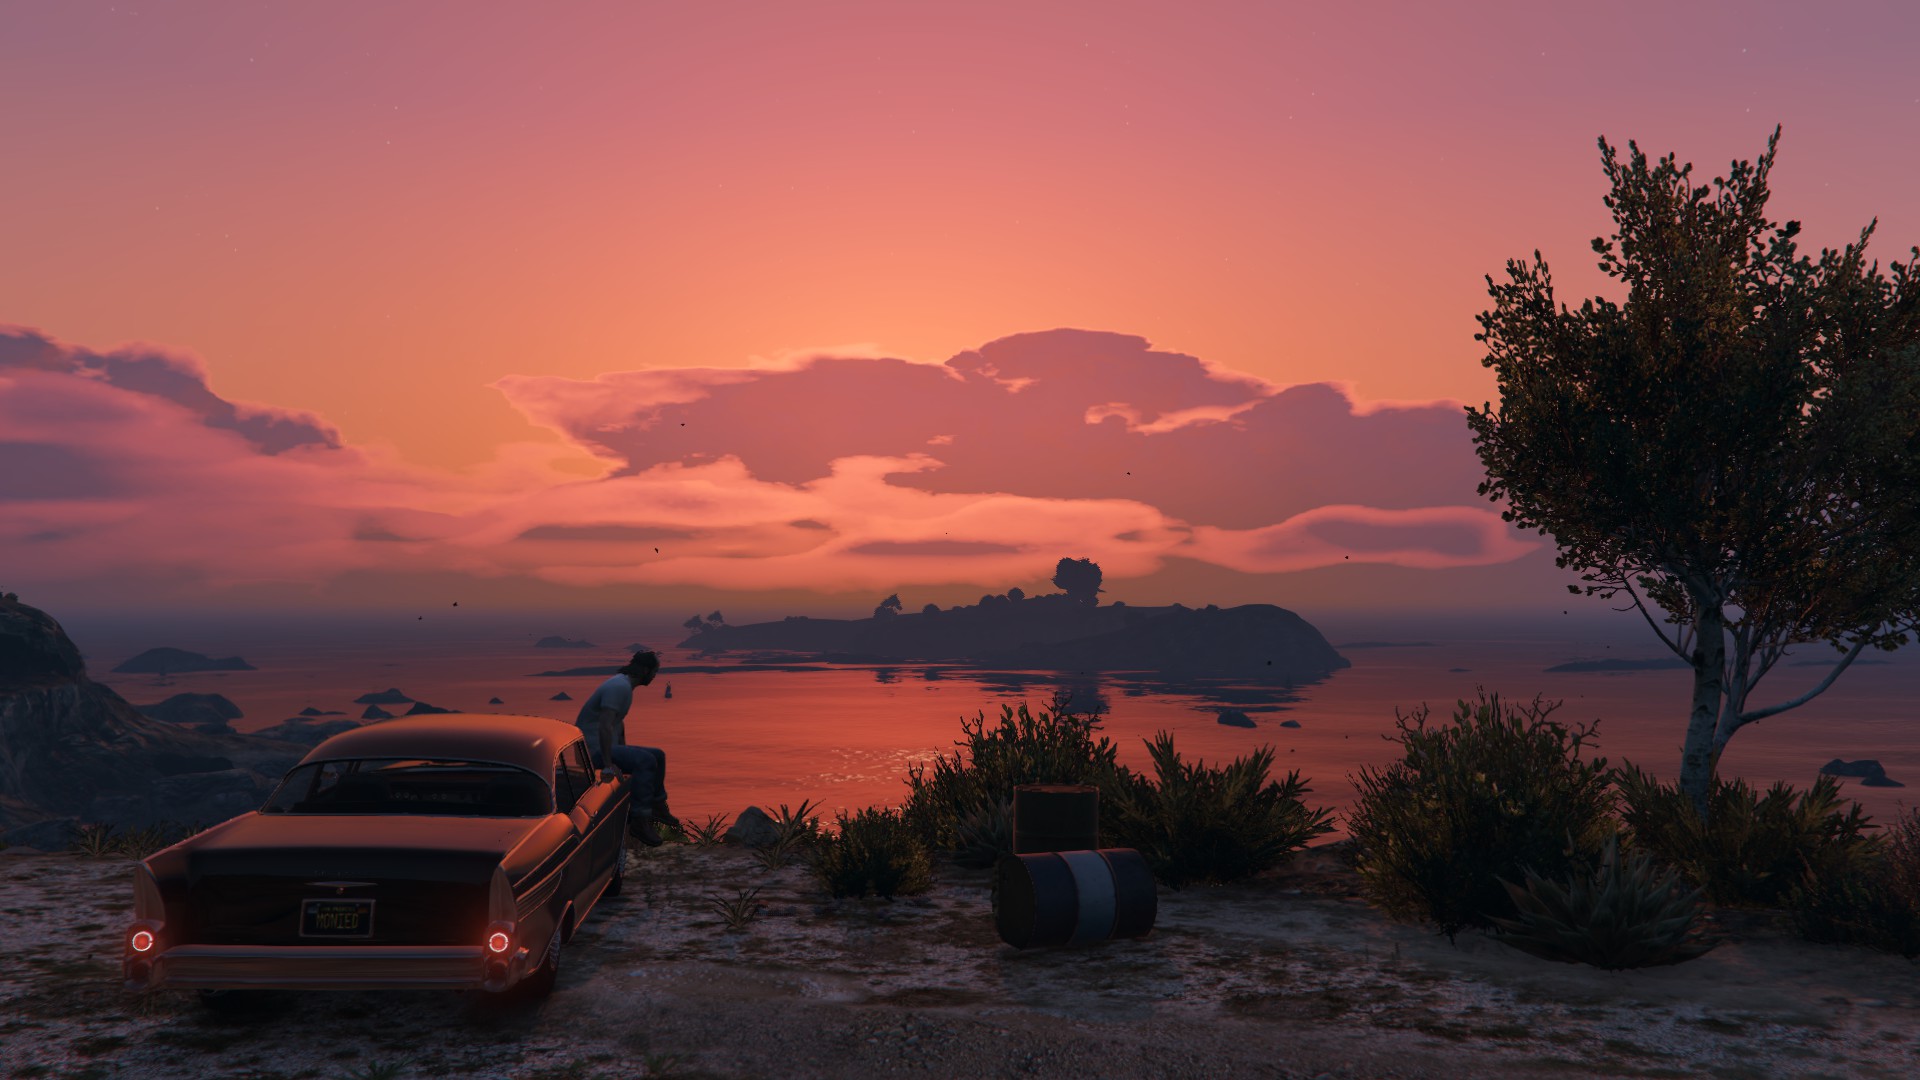 2440x1440 grand theft auto v backgrounds